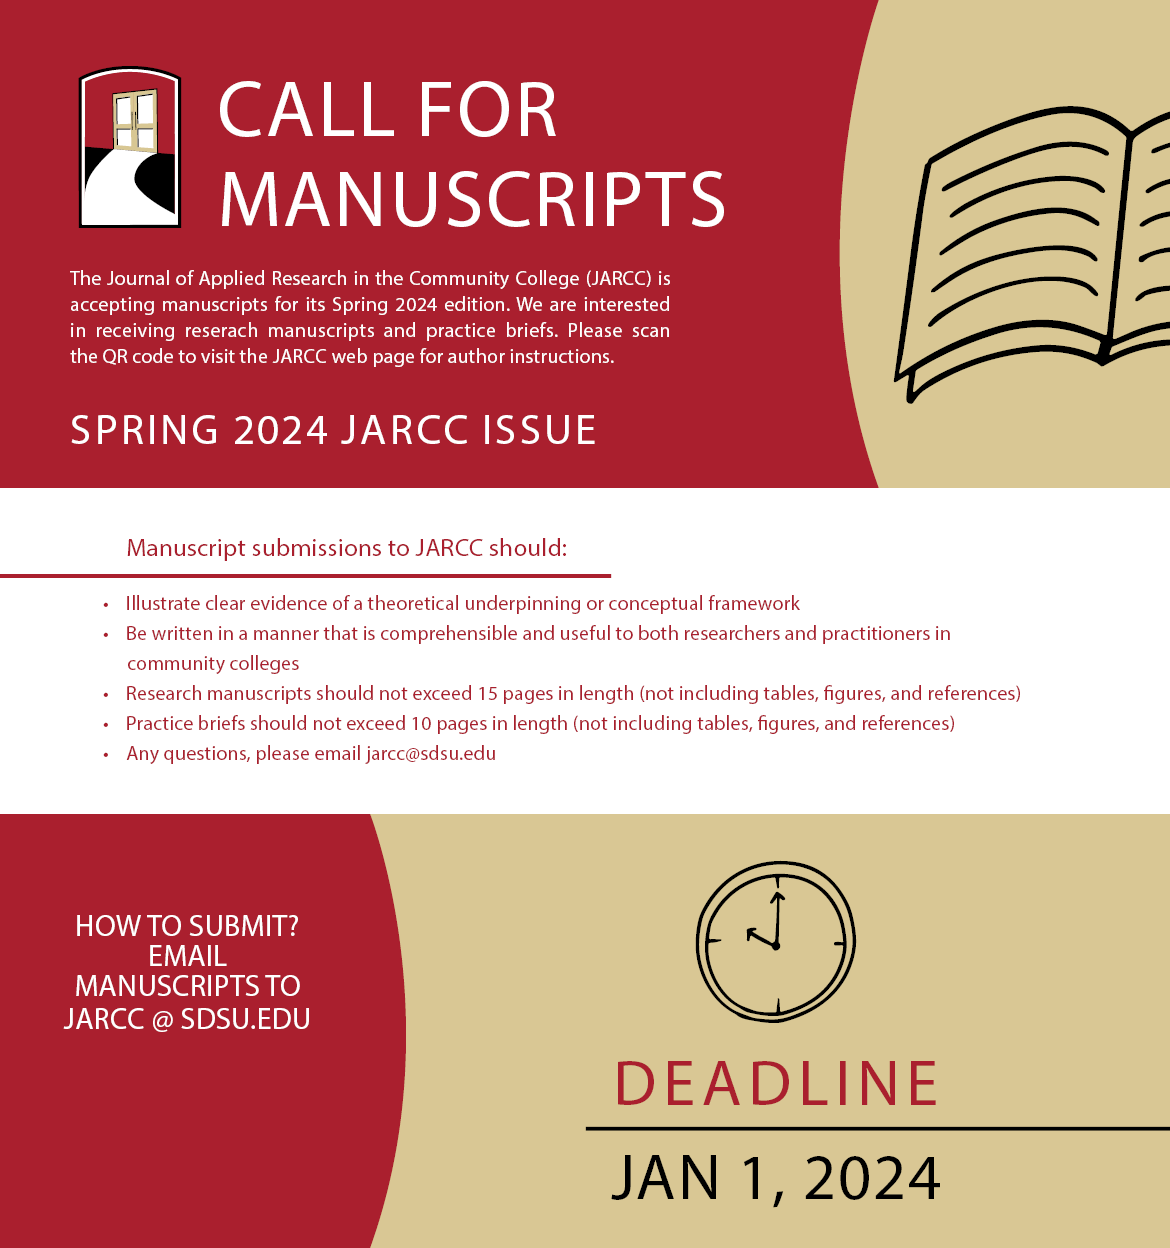 The Journal of applied research in the community college (JARCC) is accepting manuscripts for its Spring 2024 edition.